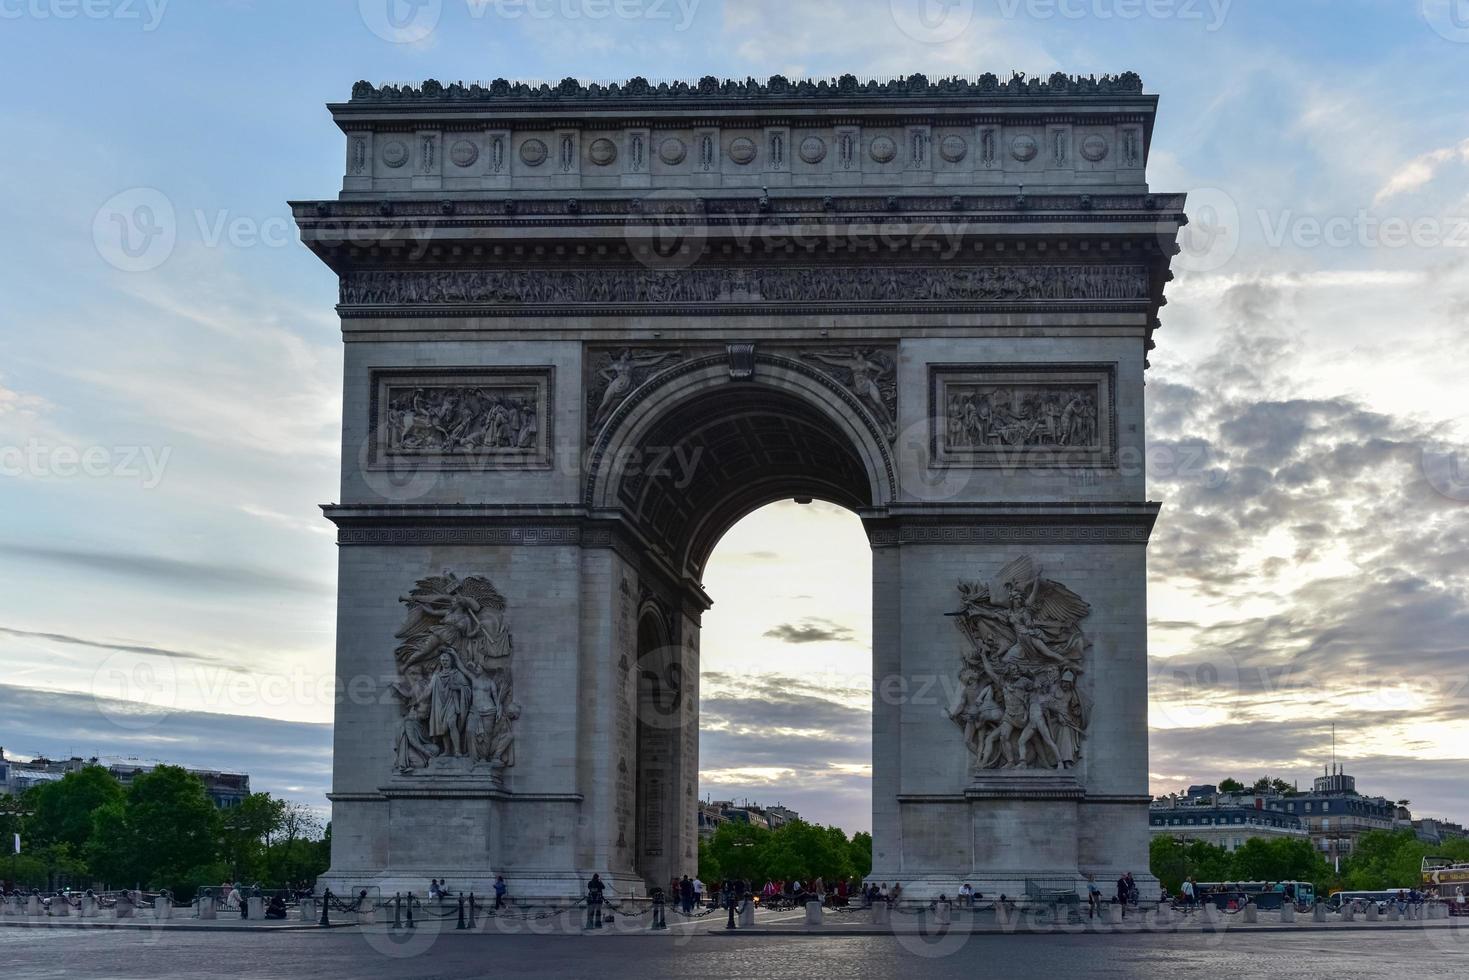 The Arc de Triomphe de l'Etoile, is one of the most famous monuments in Paris, standing at the western end of the Champs-elysees at the center of Place Charles de Gaulle. photo